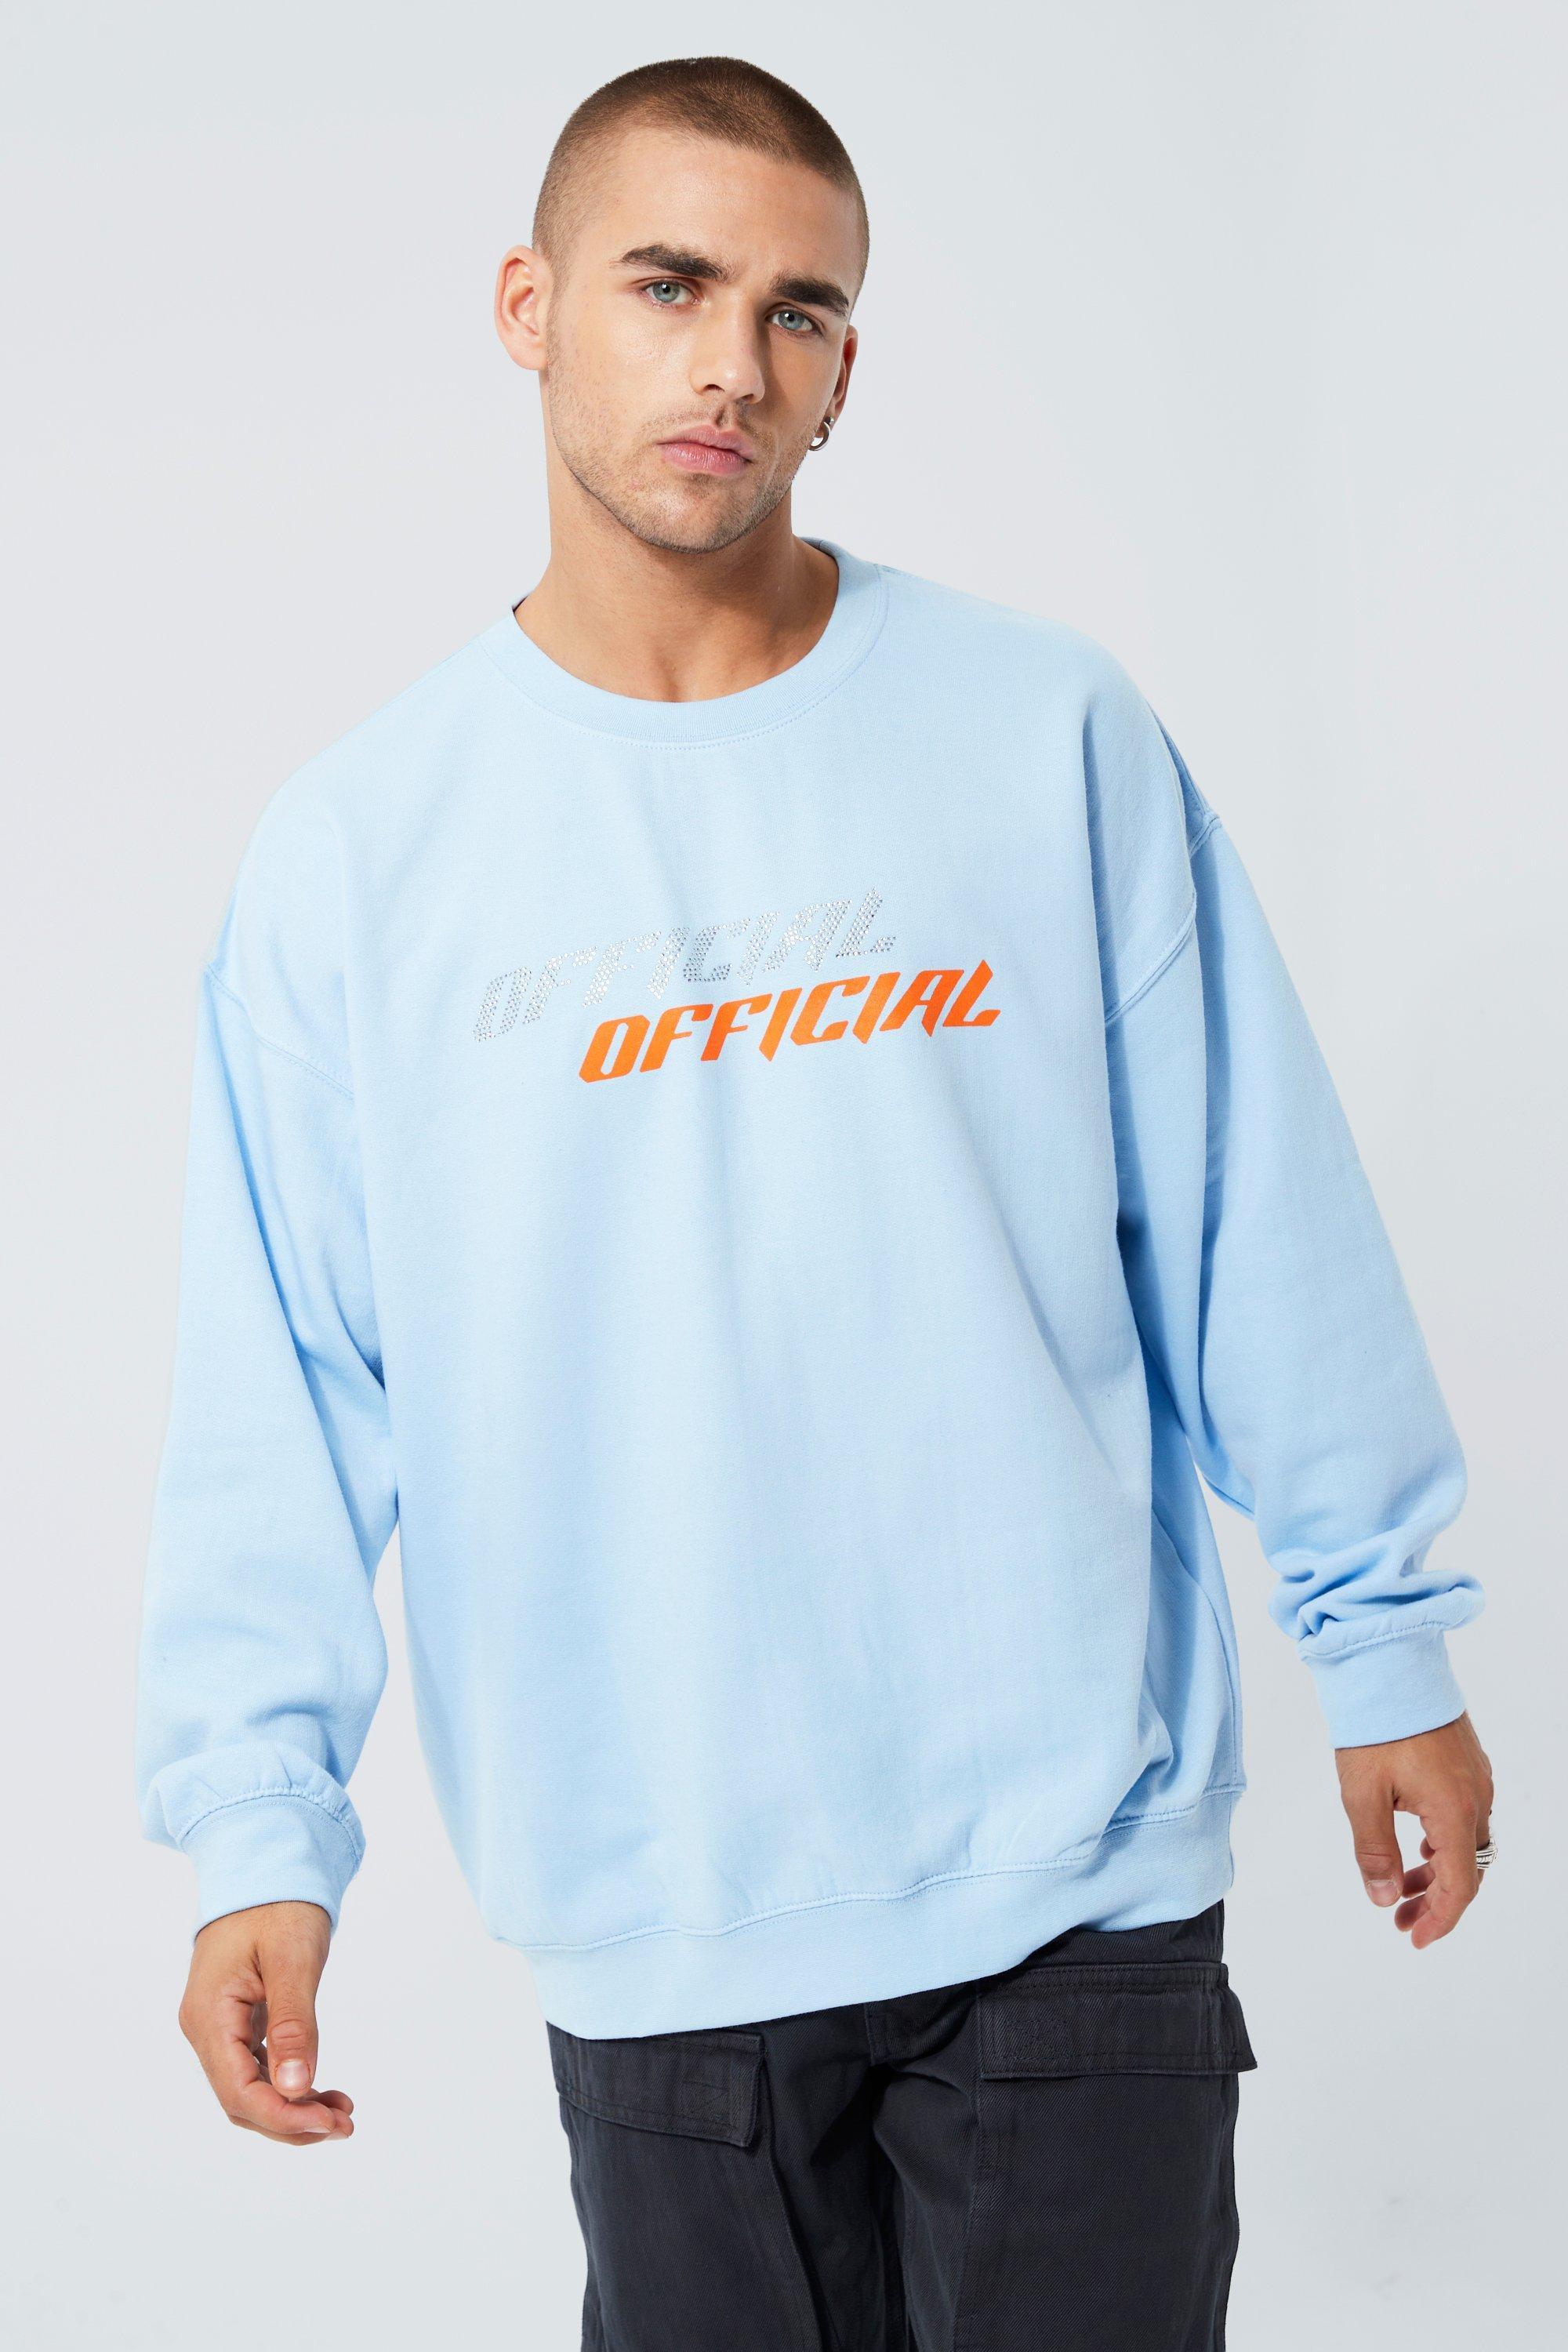 BoohooMAN Oversized Official Rhinestone Print Long Sleeve T-shirt in Blue  for Men | Lyst